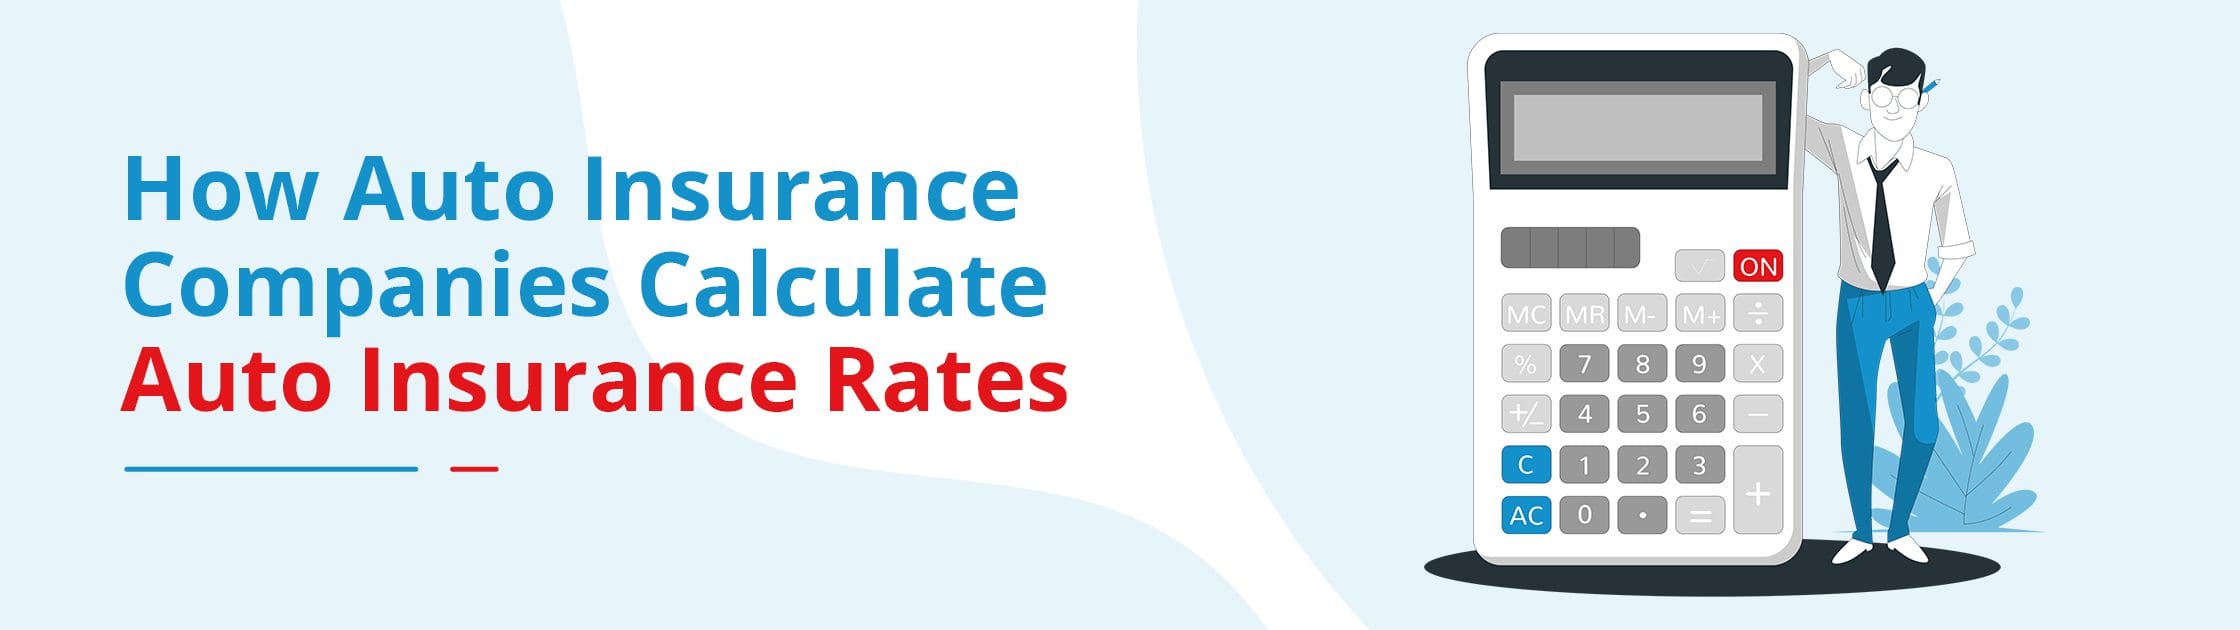 what affects car insurance rates